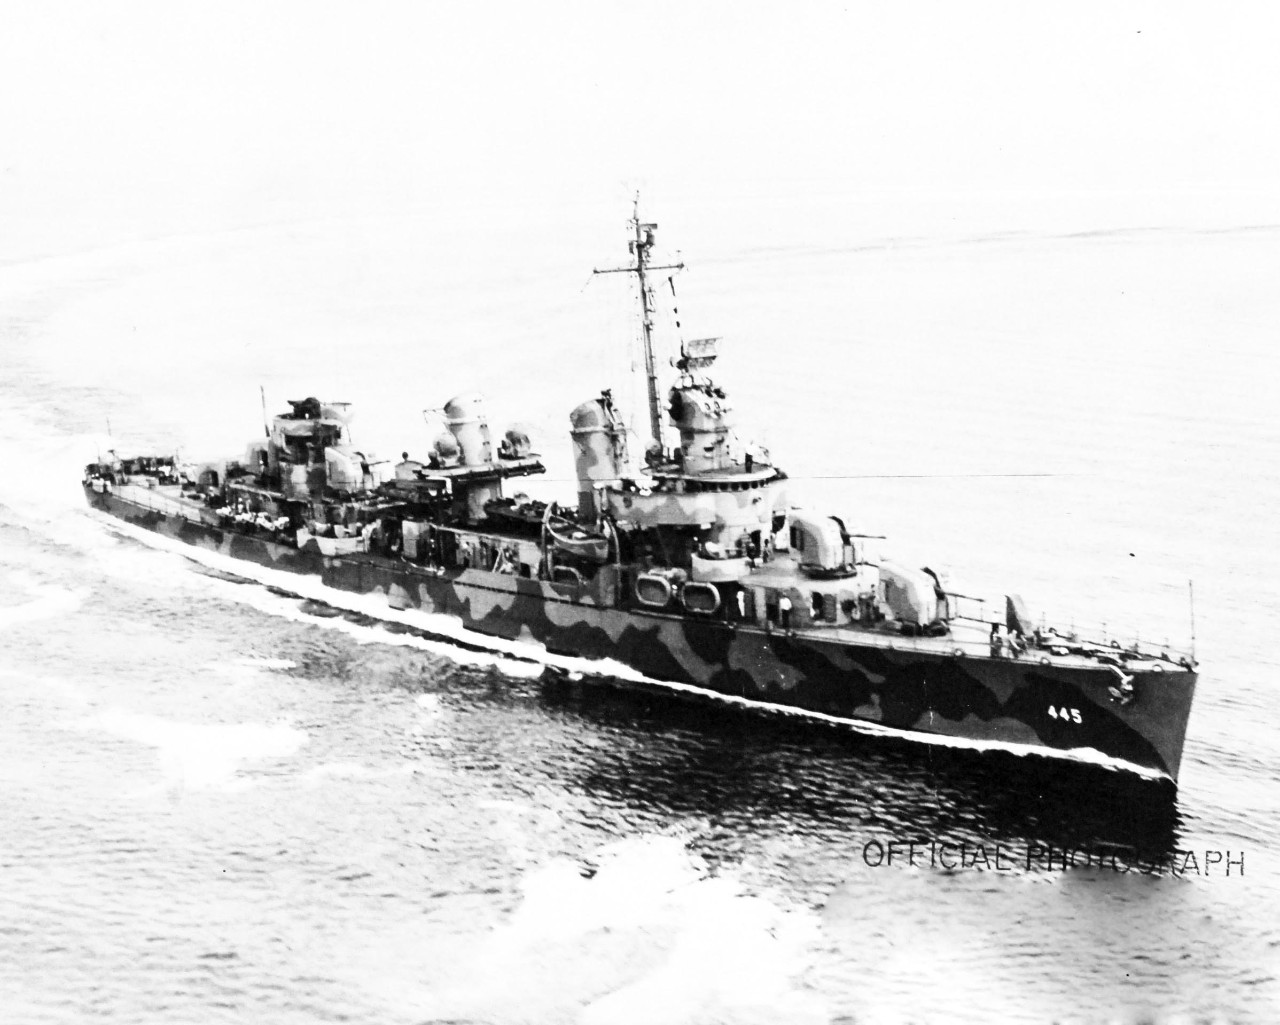 80-G-15832:  USS Fletcher (DD-445), 1942.  Official U.S. Navy Photograph, now in the collections of the National Archives.  (2017/09/19).  